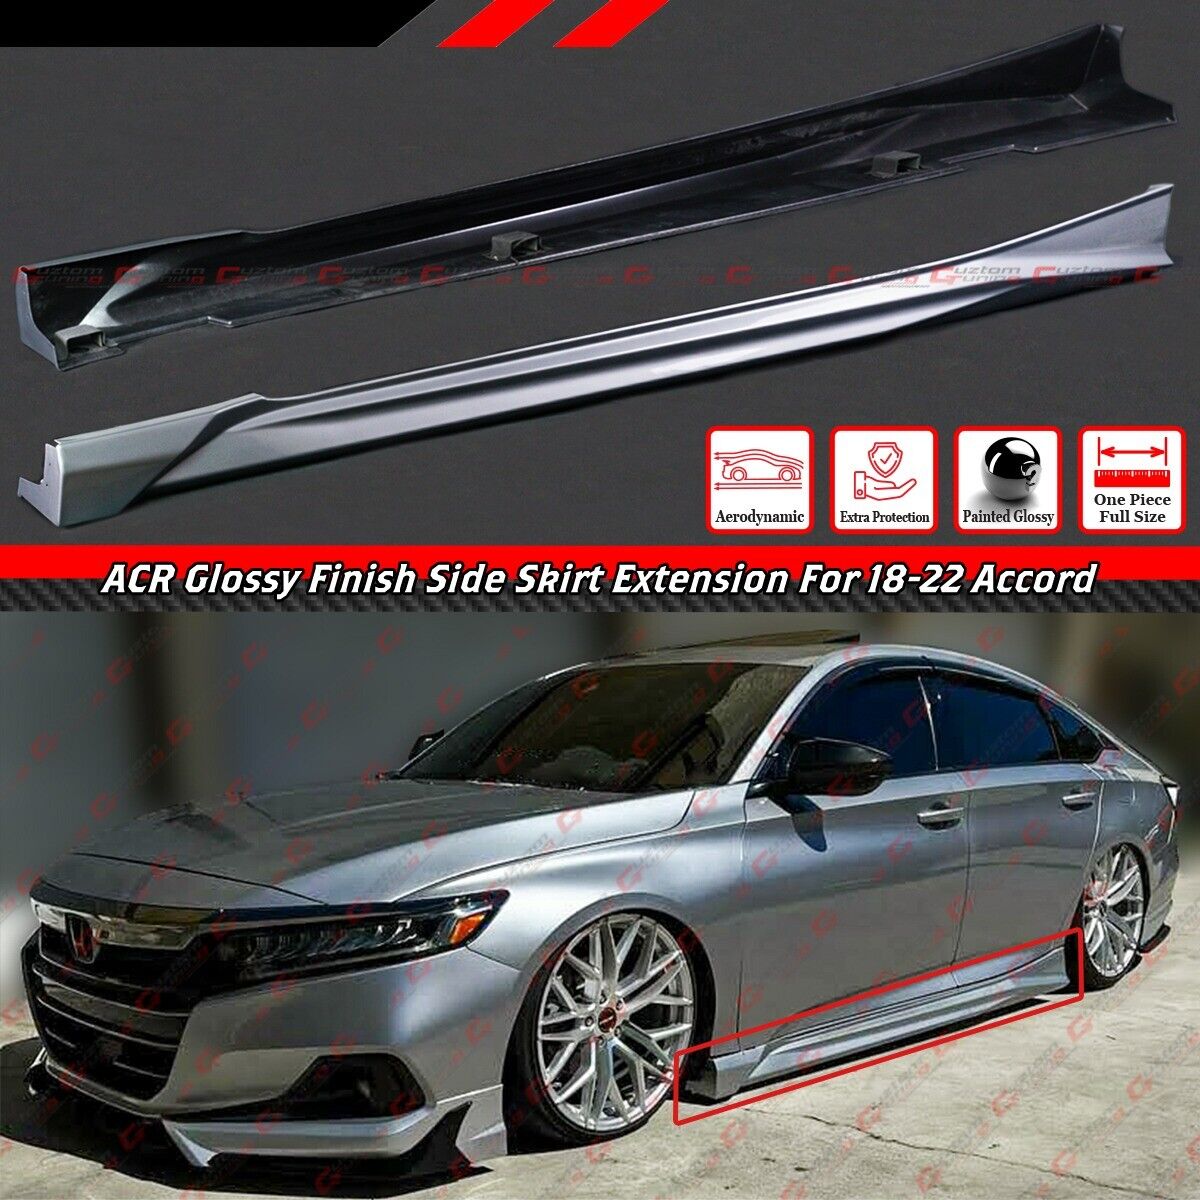 For 2018-22 Honda Accord ACR Lunar Silver Metallic Add On Side Skirt Extensions